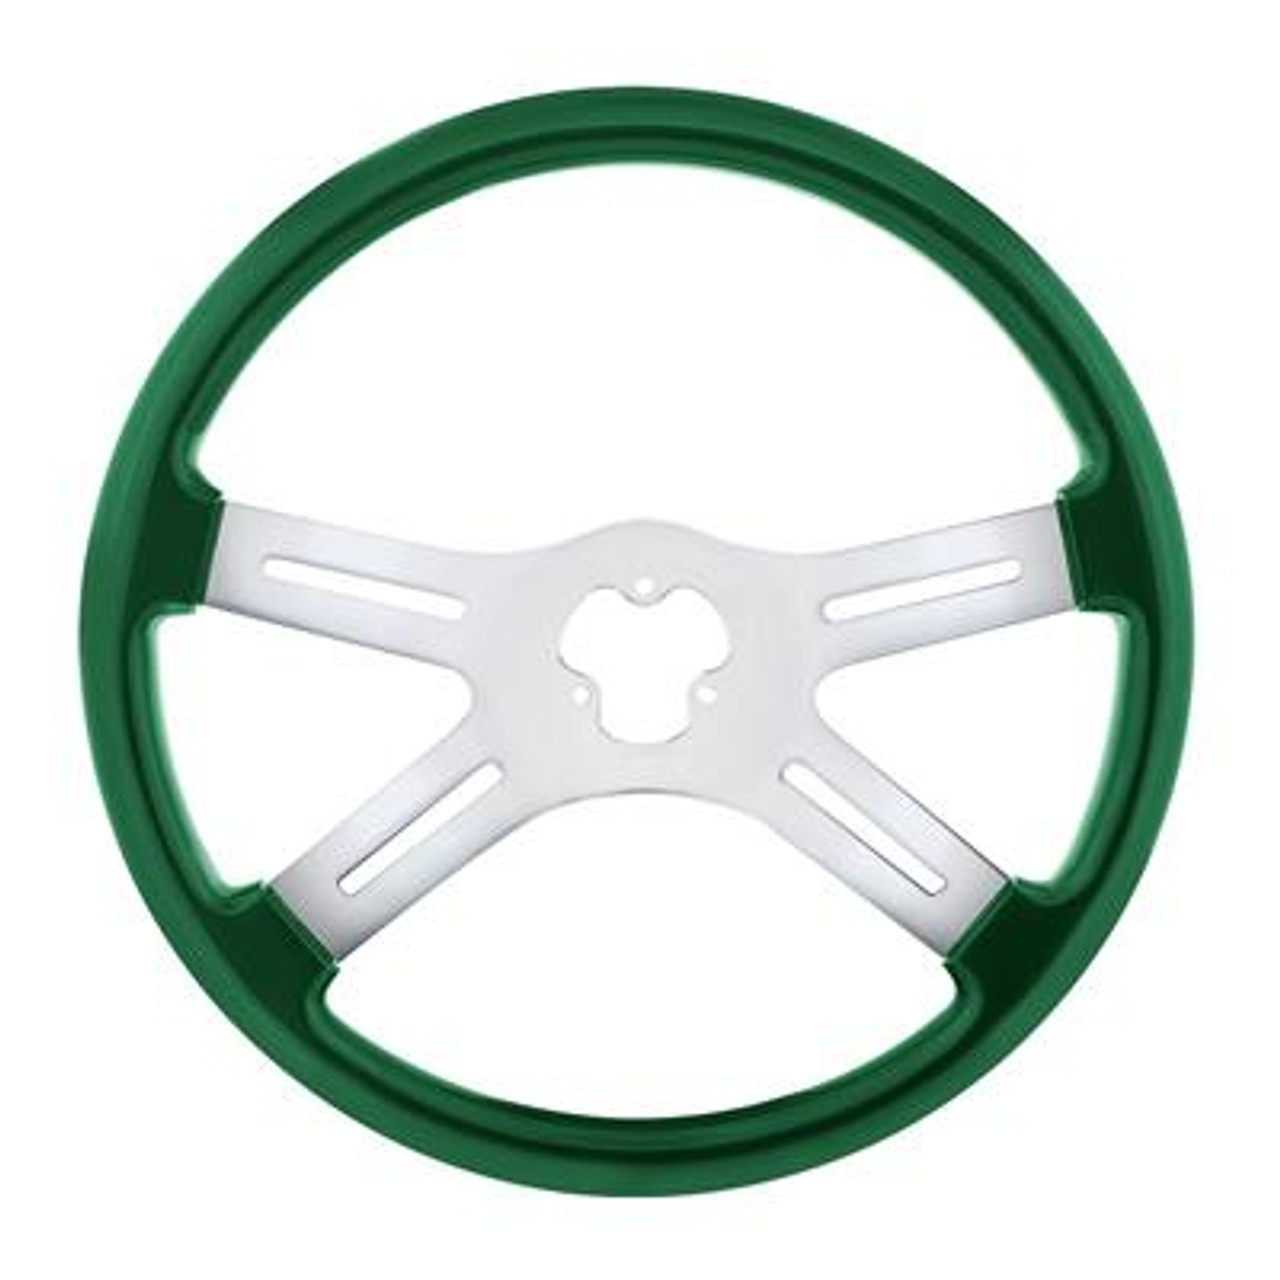 Thanks to United Pacific, you have all kinds of steering wheels to choose from - to wood, chrome, to all the colors of the rainbow. We also carry a variety of steering wheel covers and spinners to help make steering maneuvers easier on you.